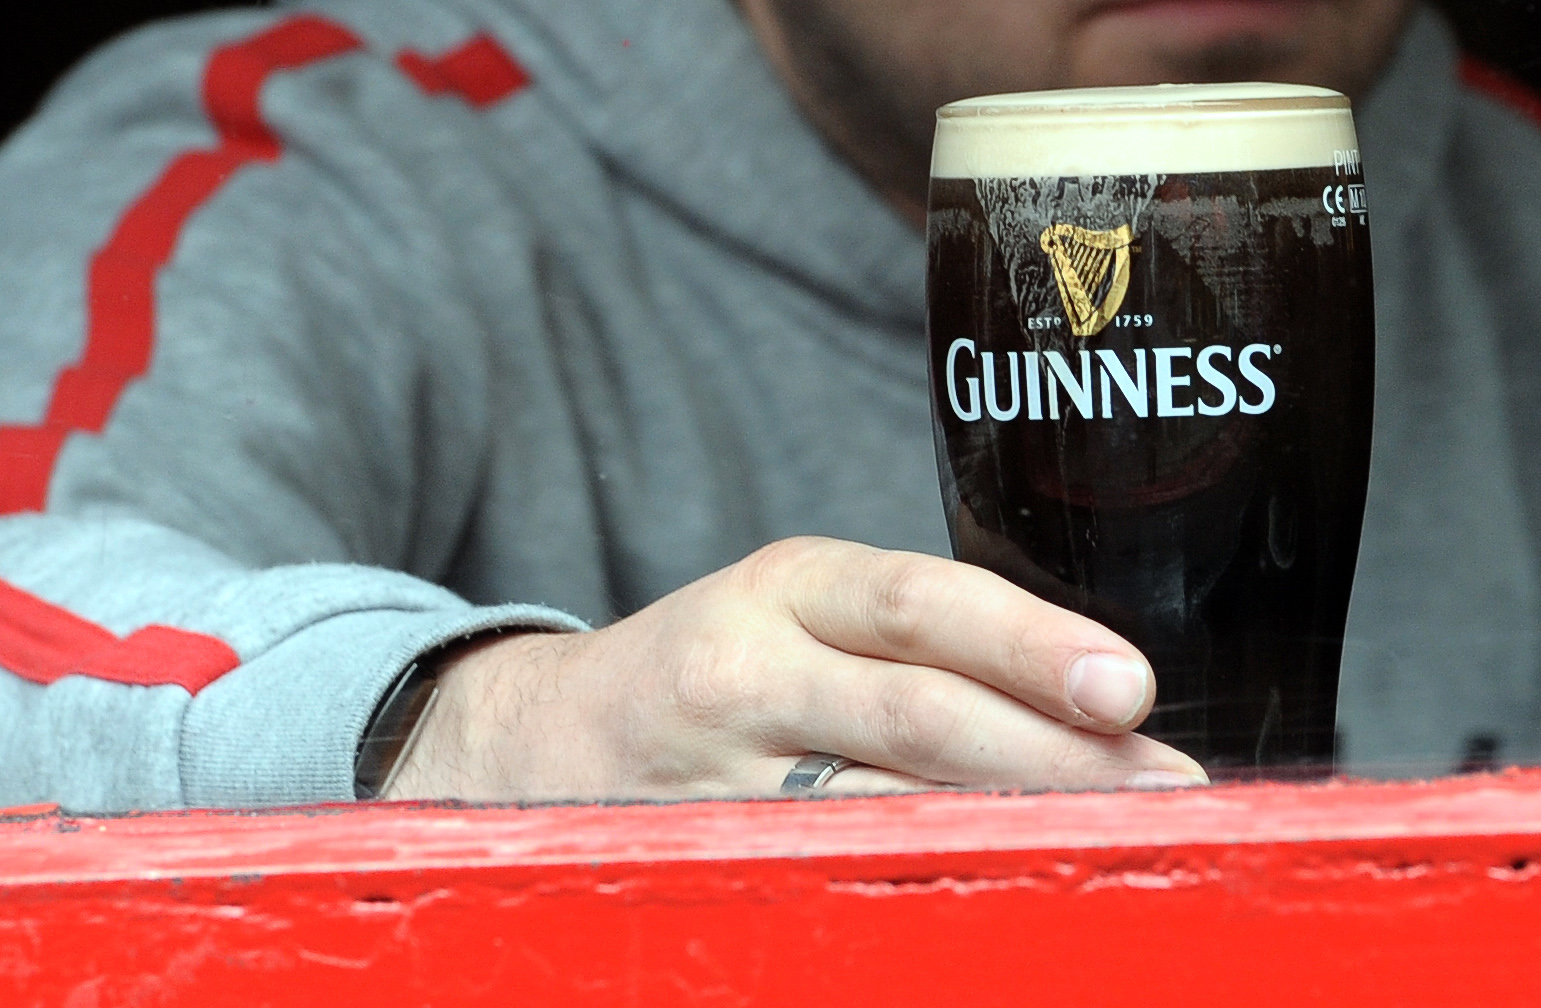 A man is pictured through the window of a bar drinking a pint of Guinness in The Temple Bar area of Dublin, Ireland on May 20, 2011. (Paul Ellis—AFP/Getty Images)